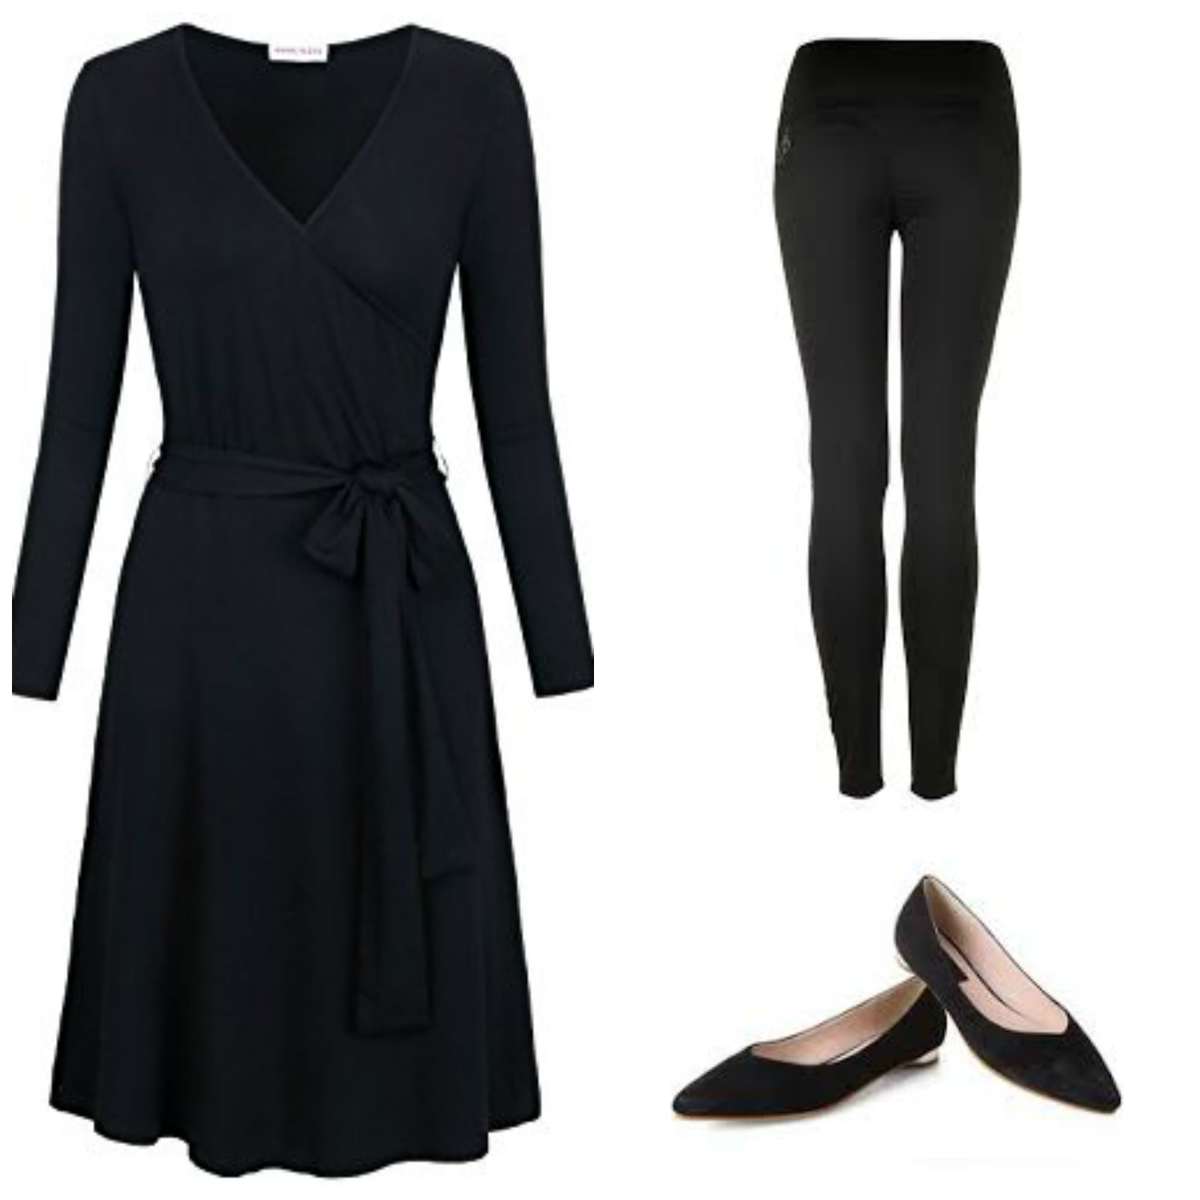 A black matte jersey wrap dress with leggings underneath and black pointed flats. Created from the travel capsule wardrobe.